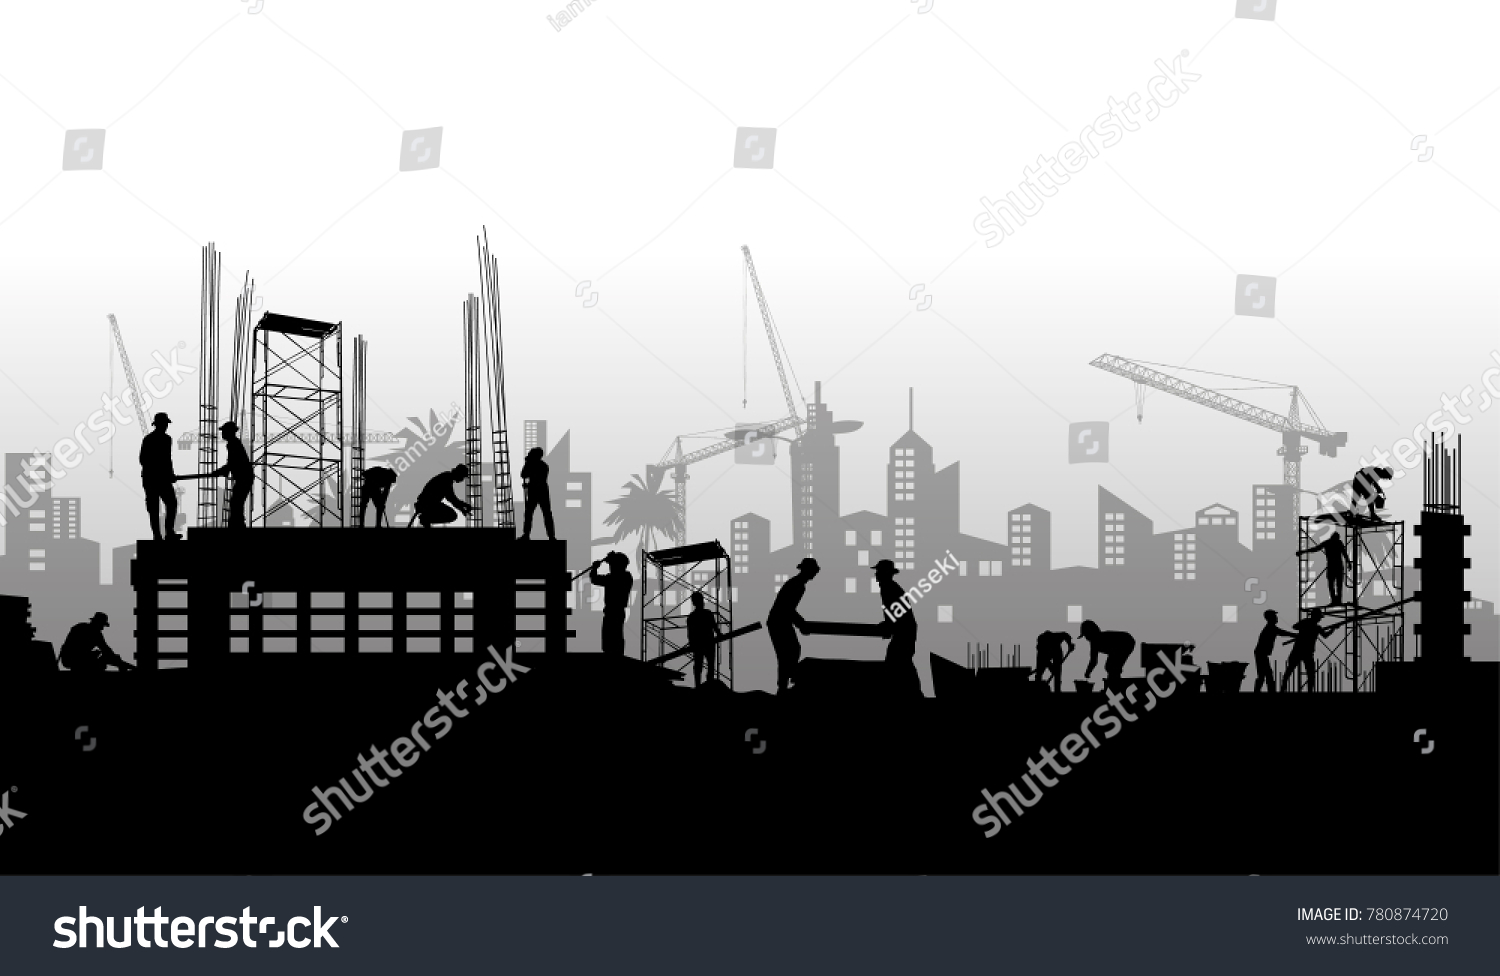 Construction vector background,Construction info graphics, Book Cover Design.